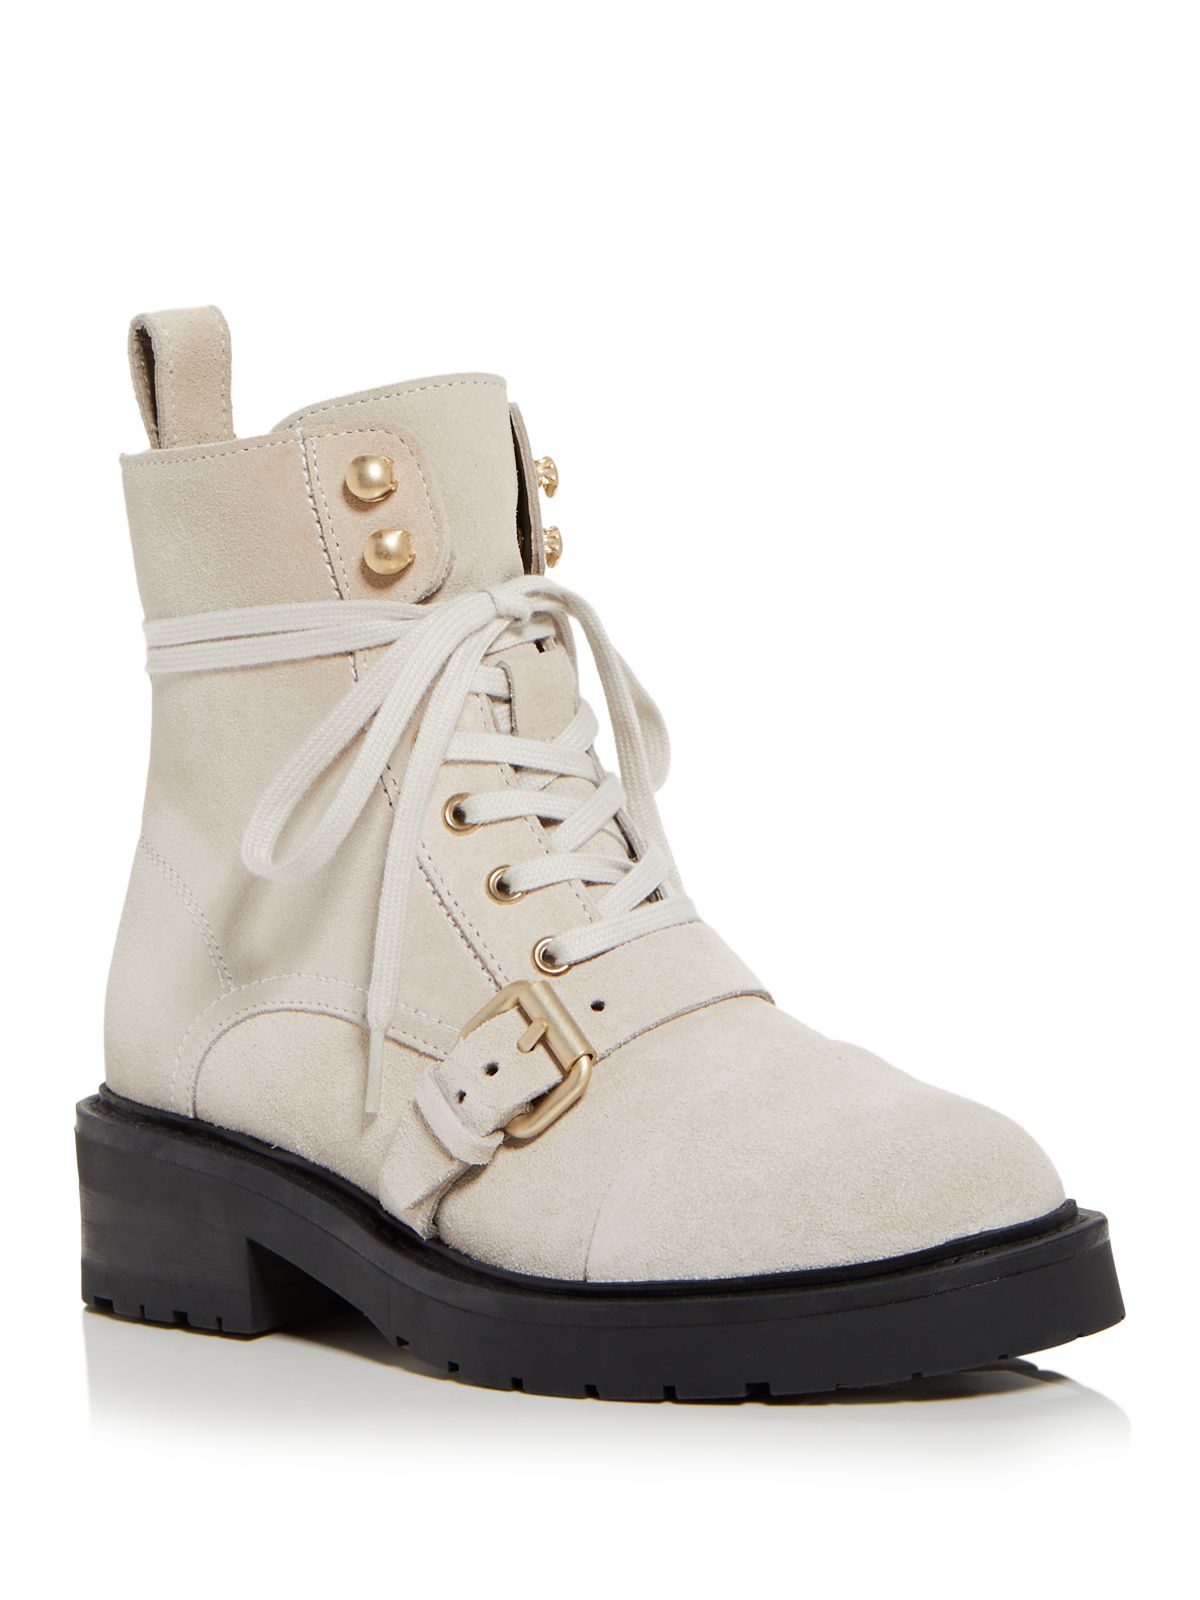 ALLSAINTS Womens Beige Lace Up Buckled Strap Back Pull-Tab Padded Donita Round Toe Block Heel Zip-Up Combat Boots 8